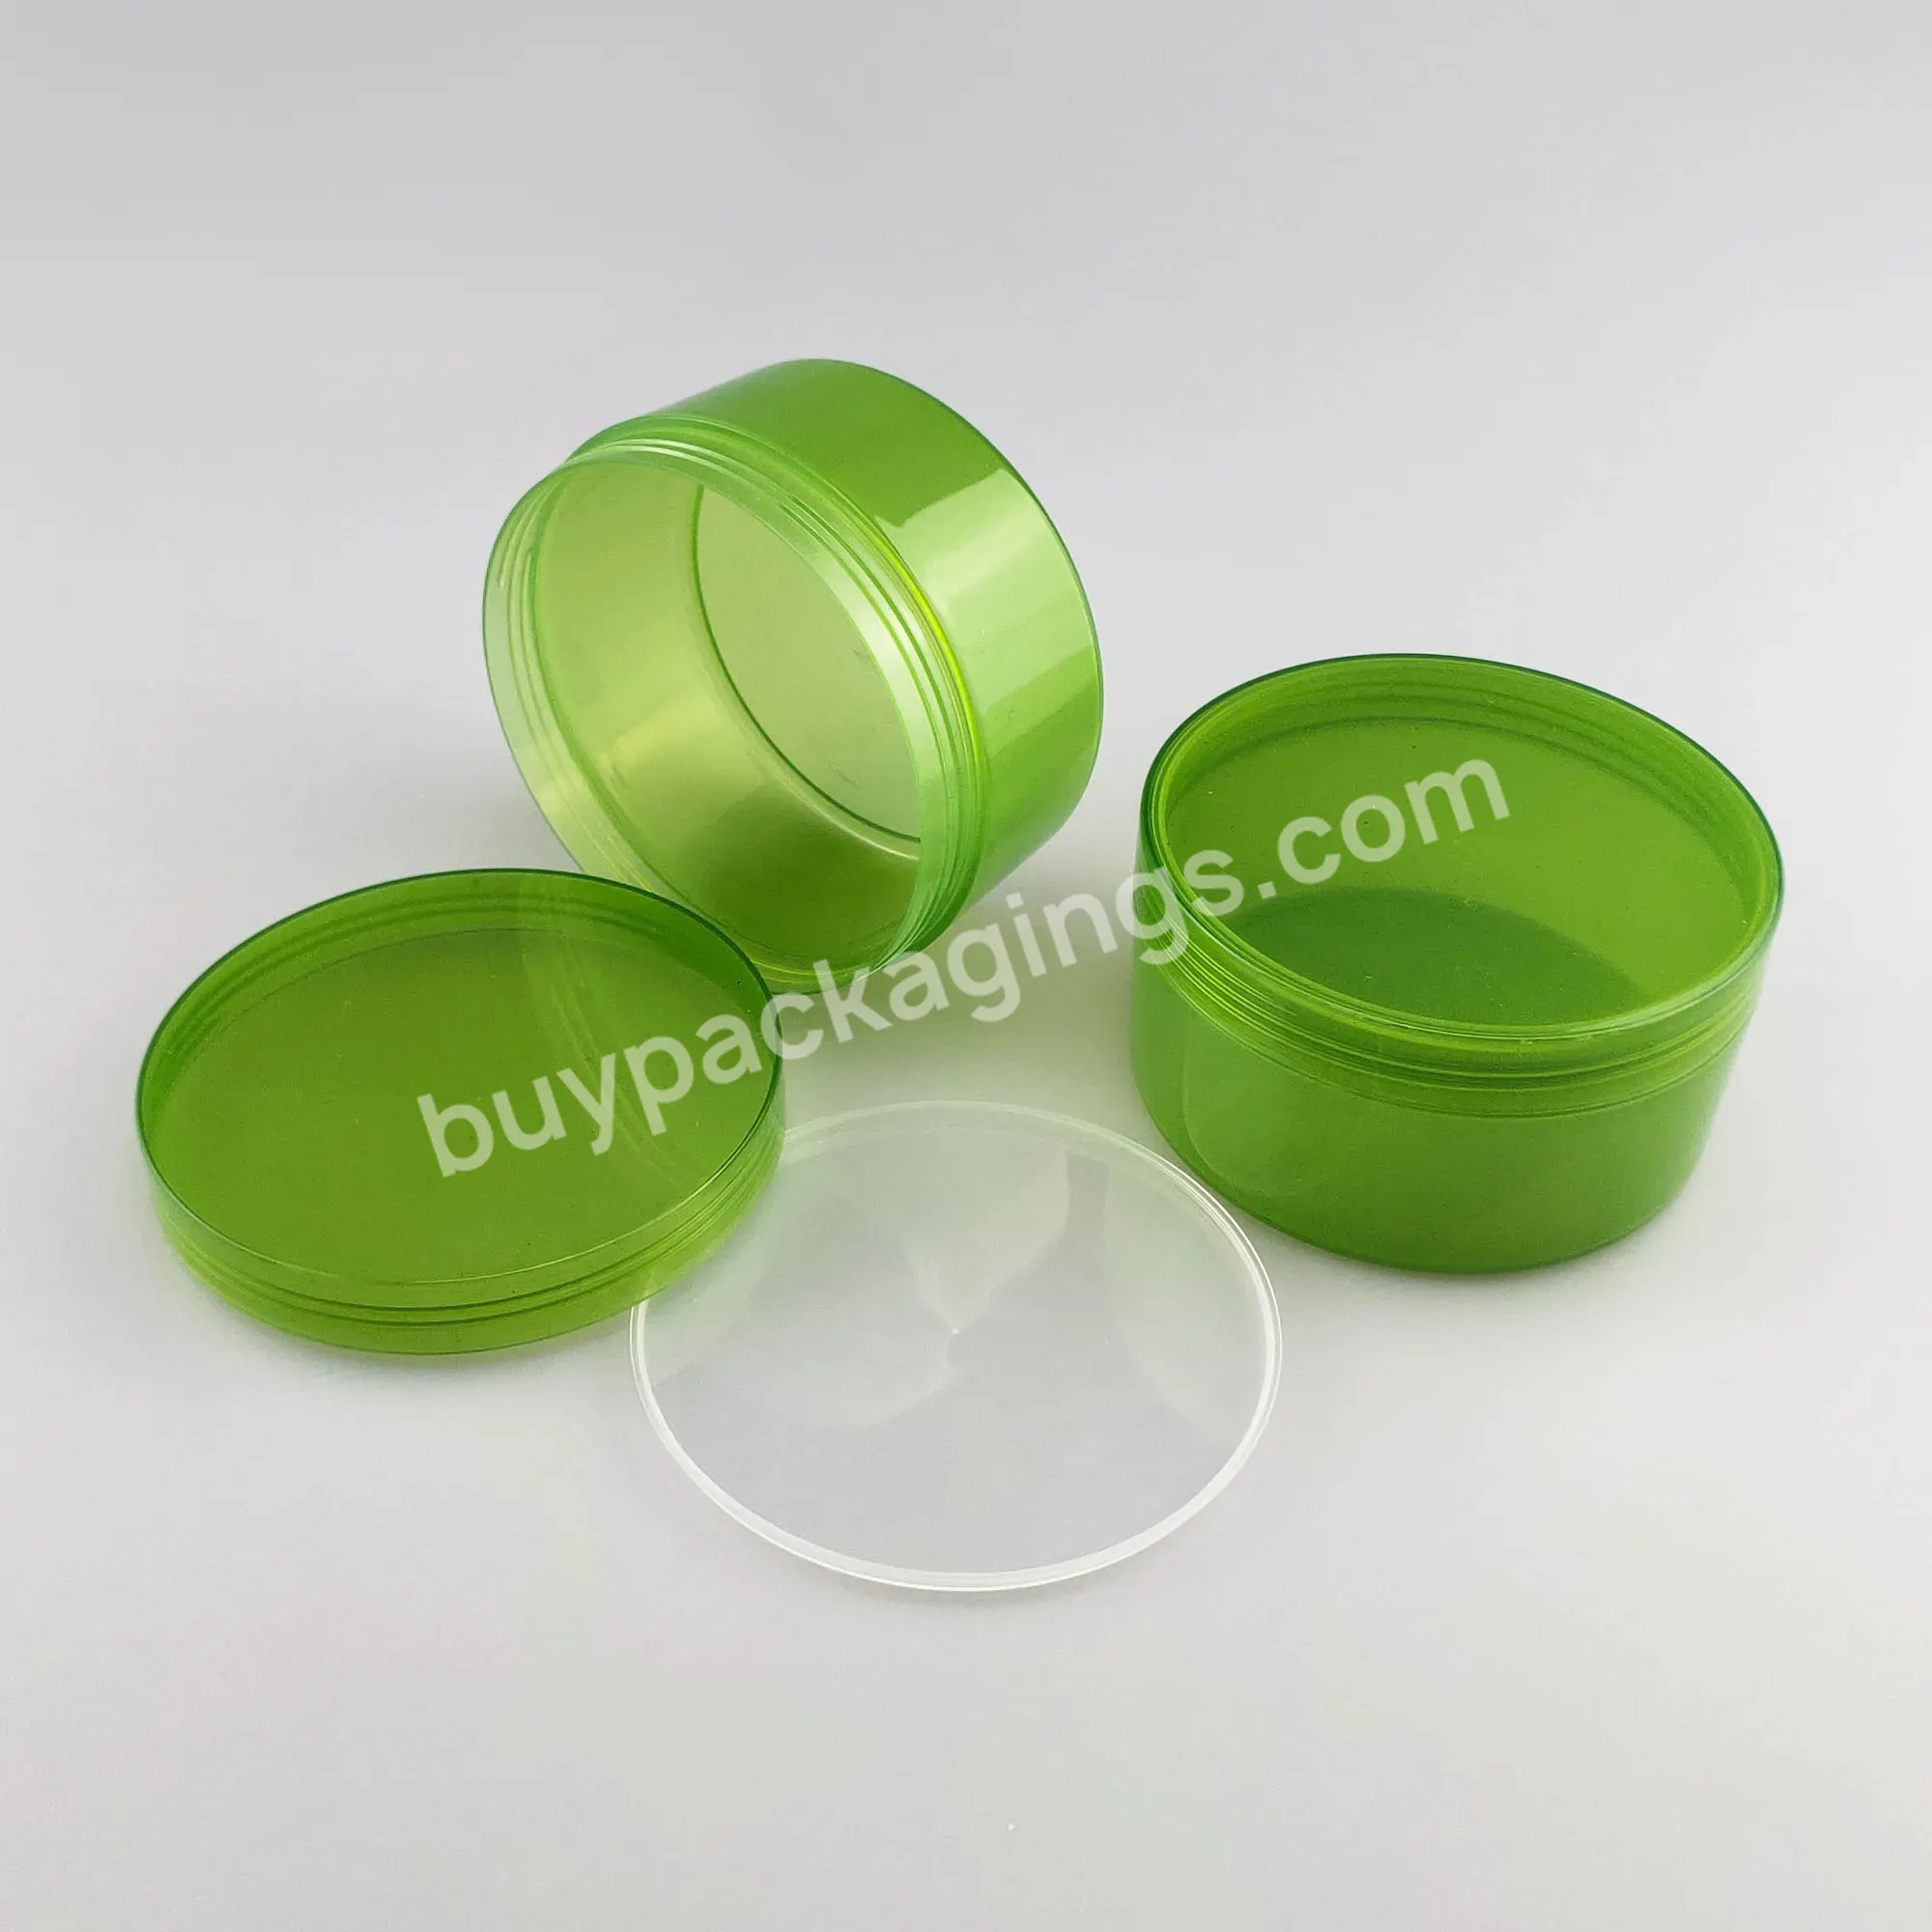 On Sales - Pp Plastic Cream Jar 300ml Green Empty Cosmetic Jar Body Scrub Container For Sale In Stock - Buy Cream Jar Factory Wholesale Popular High Selling Cheap Black Skin Care Cream Jar In Stock With Custom Logo,Cosmetic Jar Cosmetic Plastic Jar F